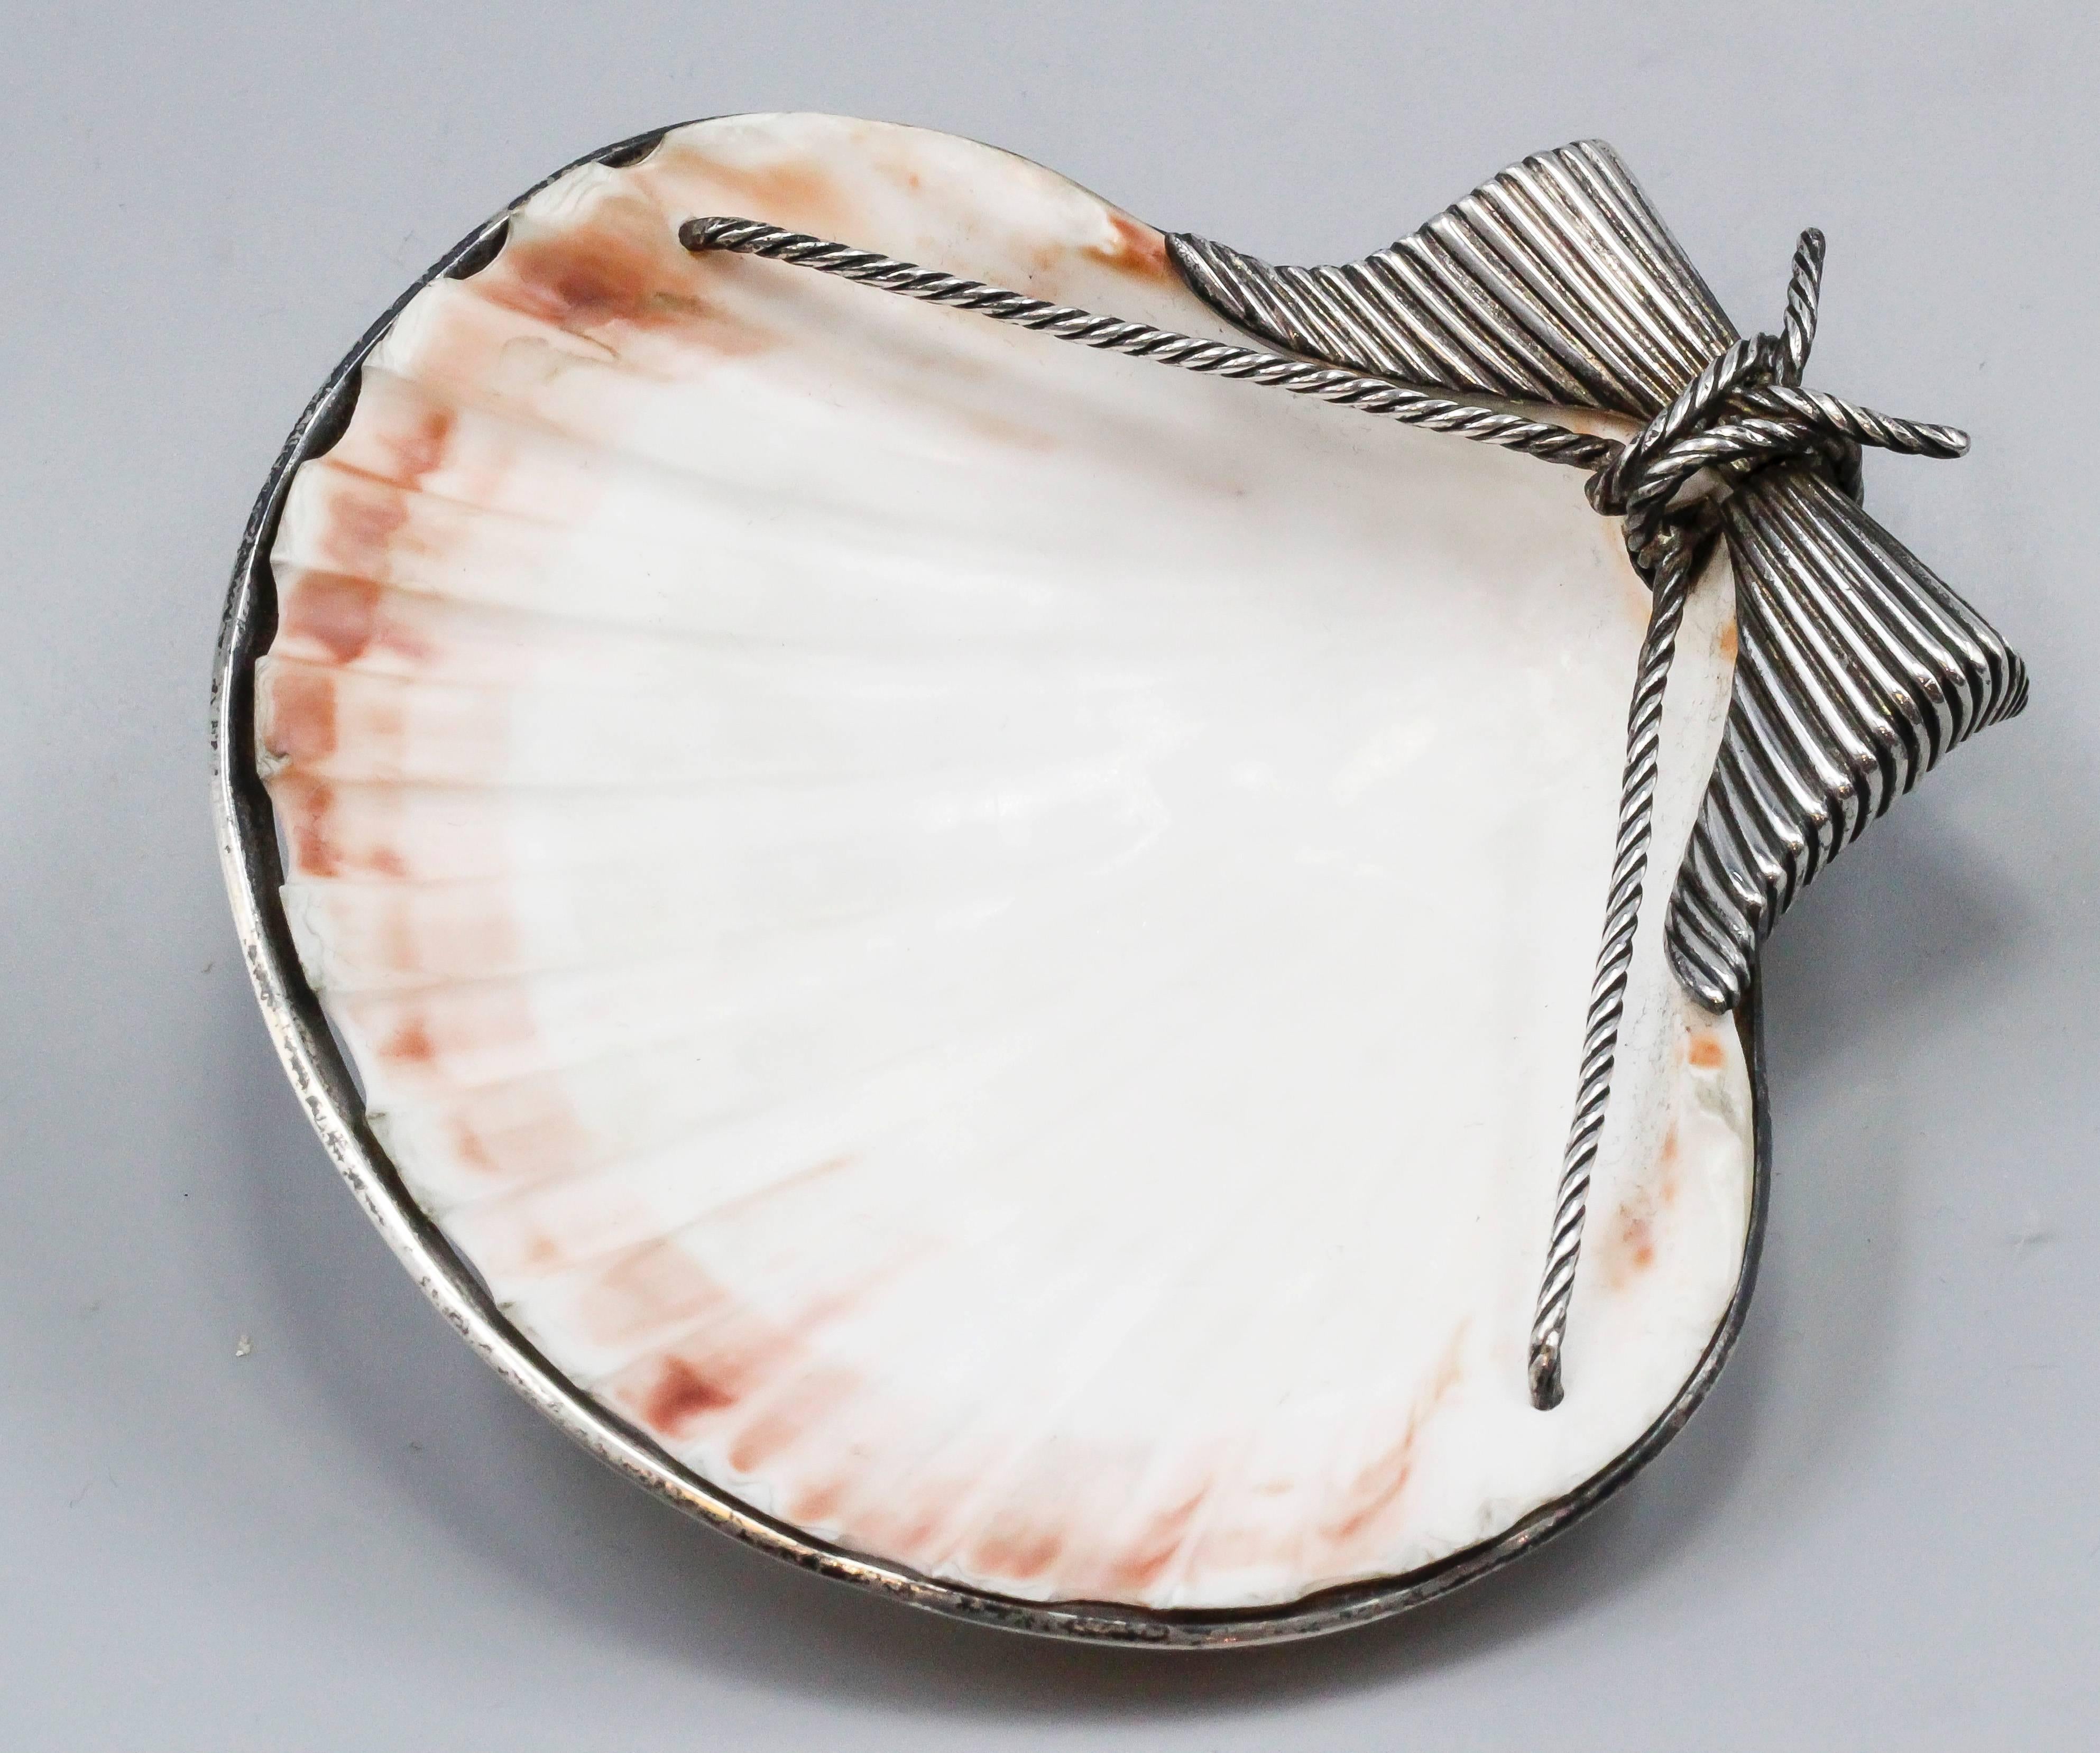 Rare and unusual sterling silver seashell dish by Tiffany & Co. Schlumberger, circa 1970s. It can be used for a variety of things, key holder, ashtray, candy holder, you name it. Great workmanship and highly versatile.

Hallmarks: Tiffany & Co.,